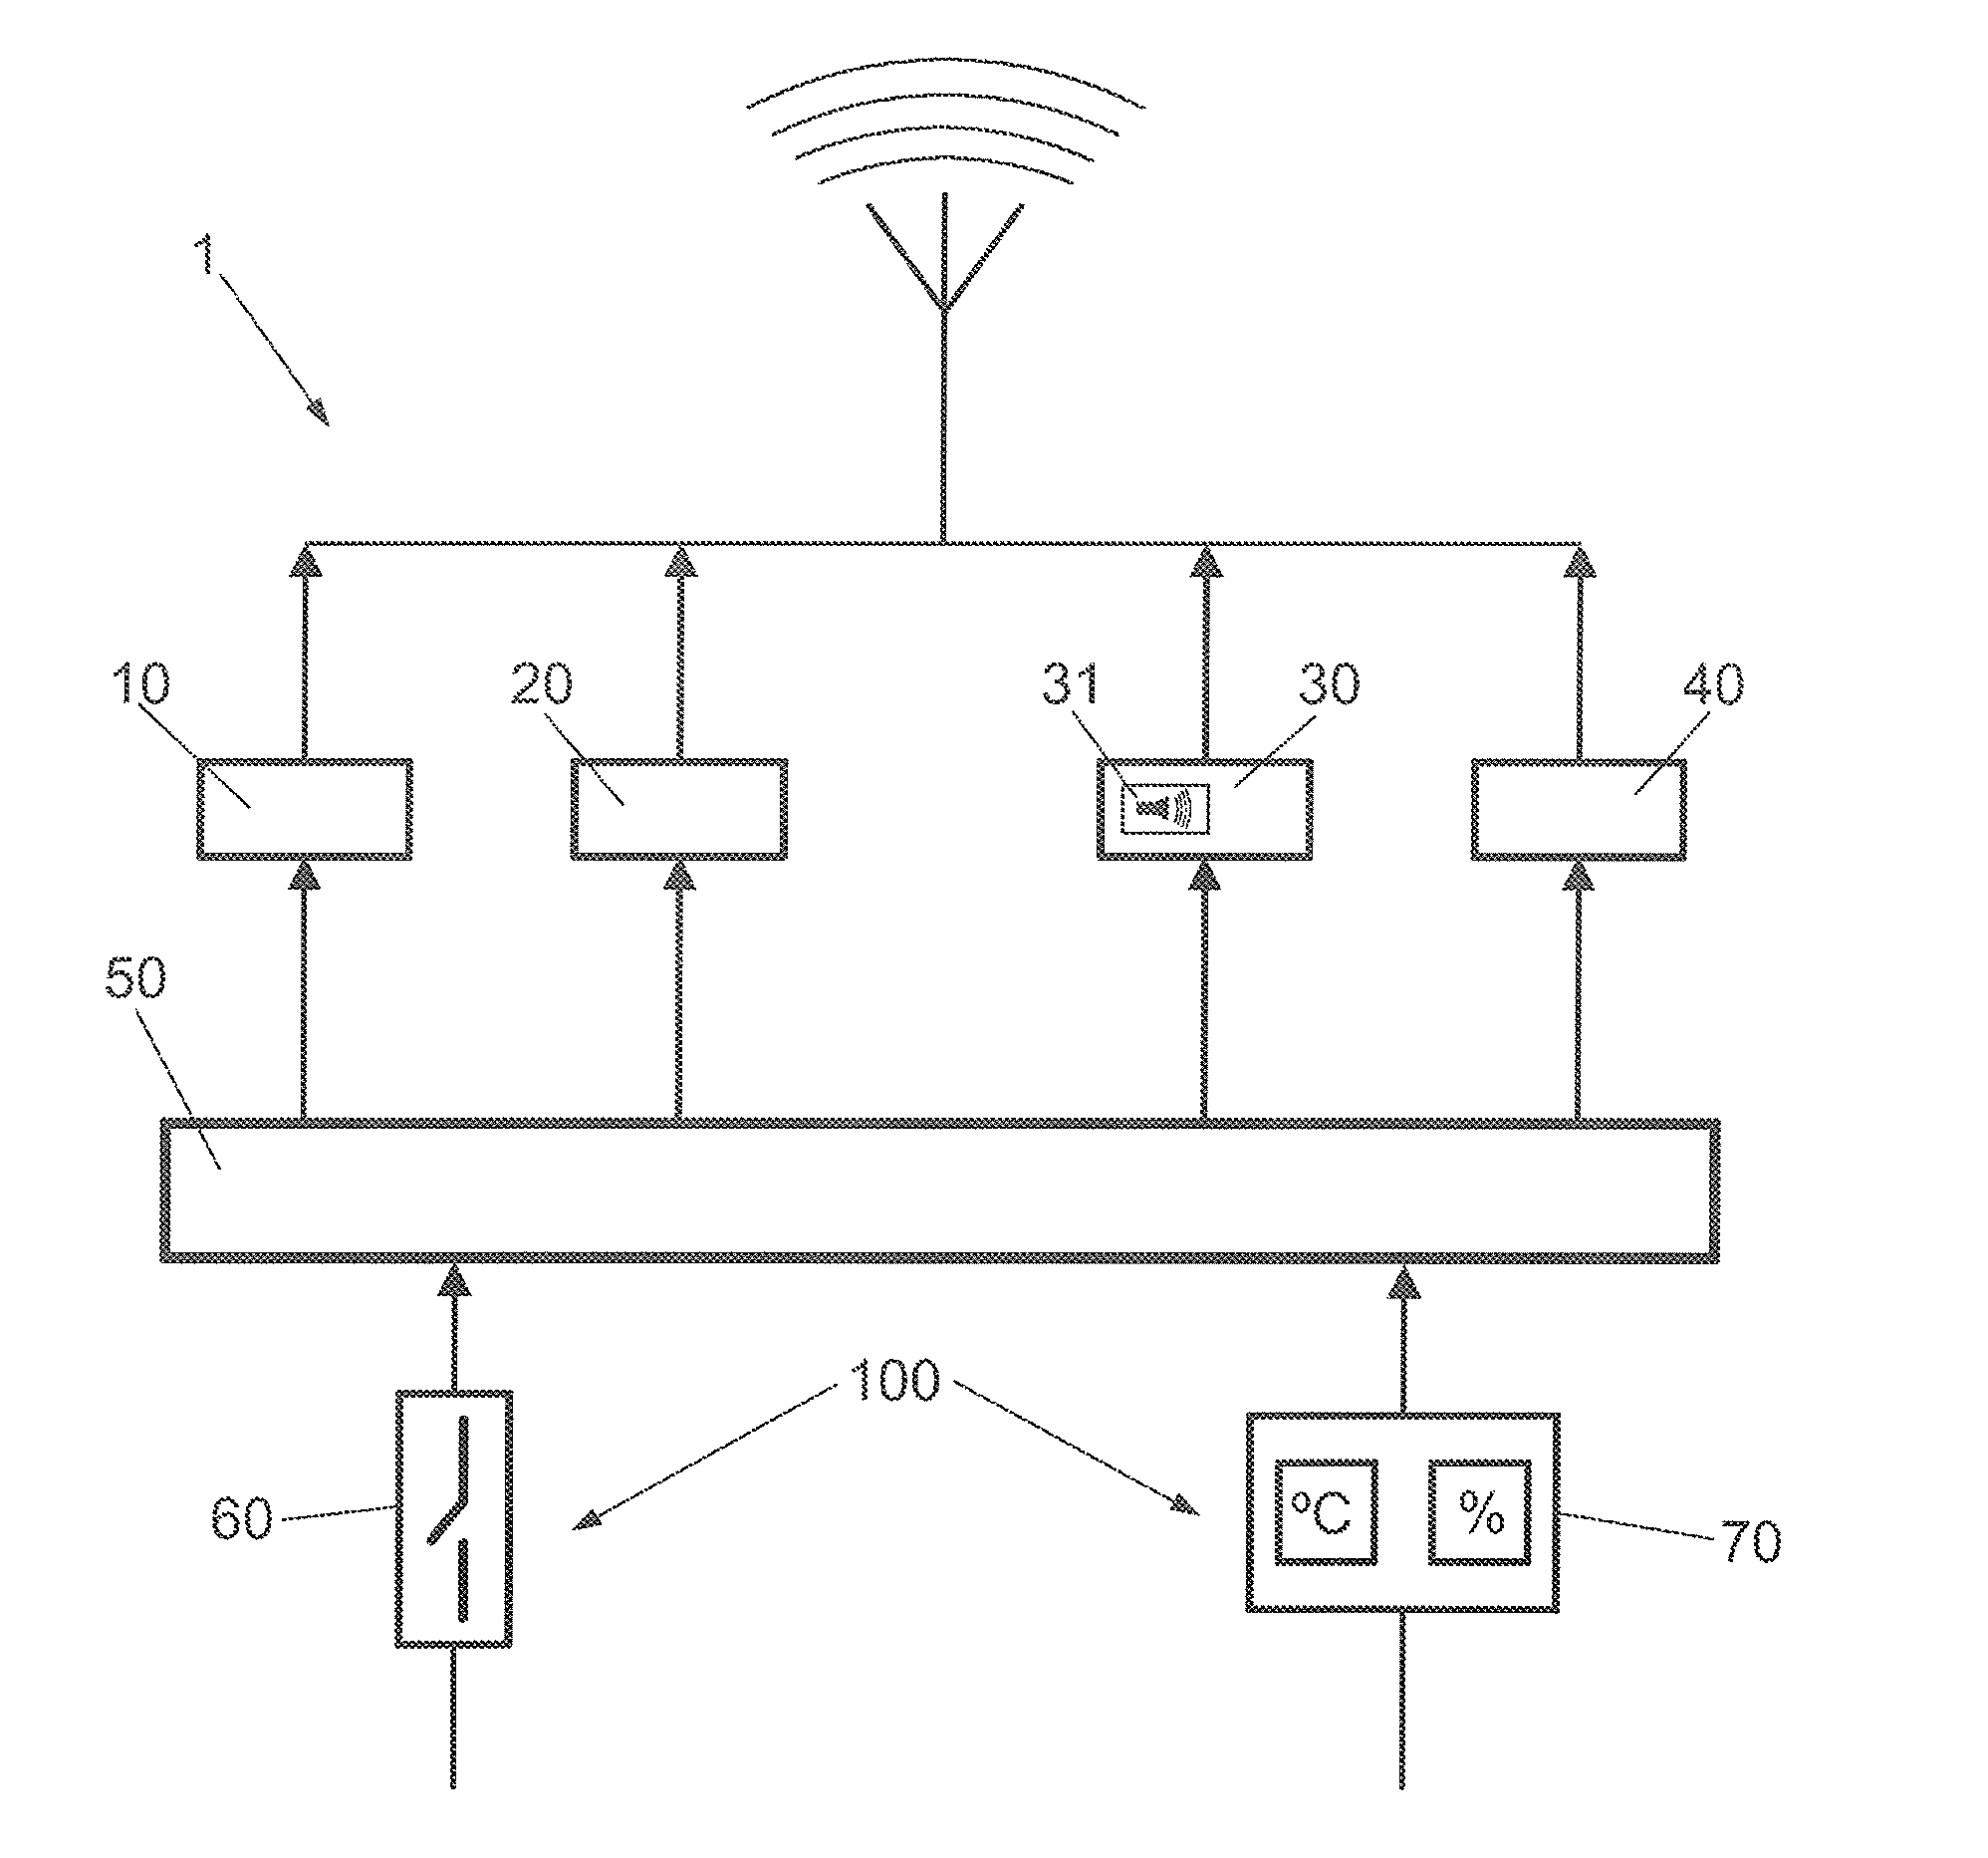 Maritime alarm and rescue system and method for controlling said system